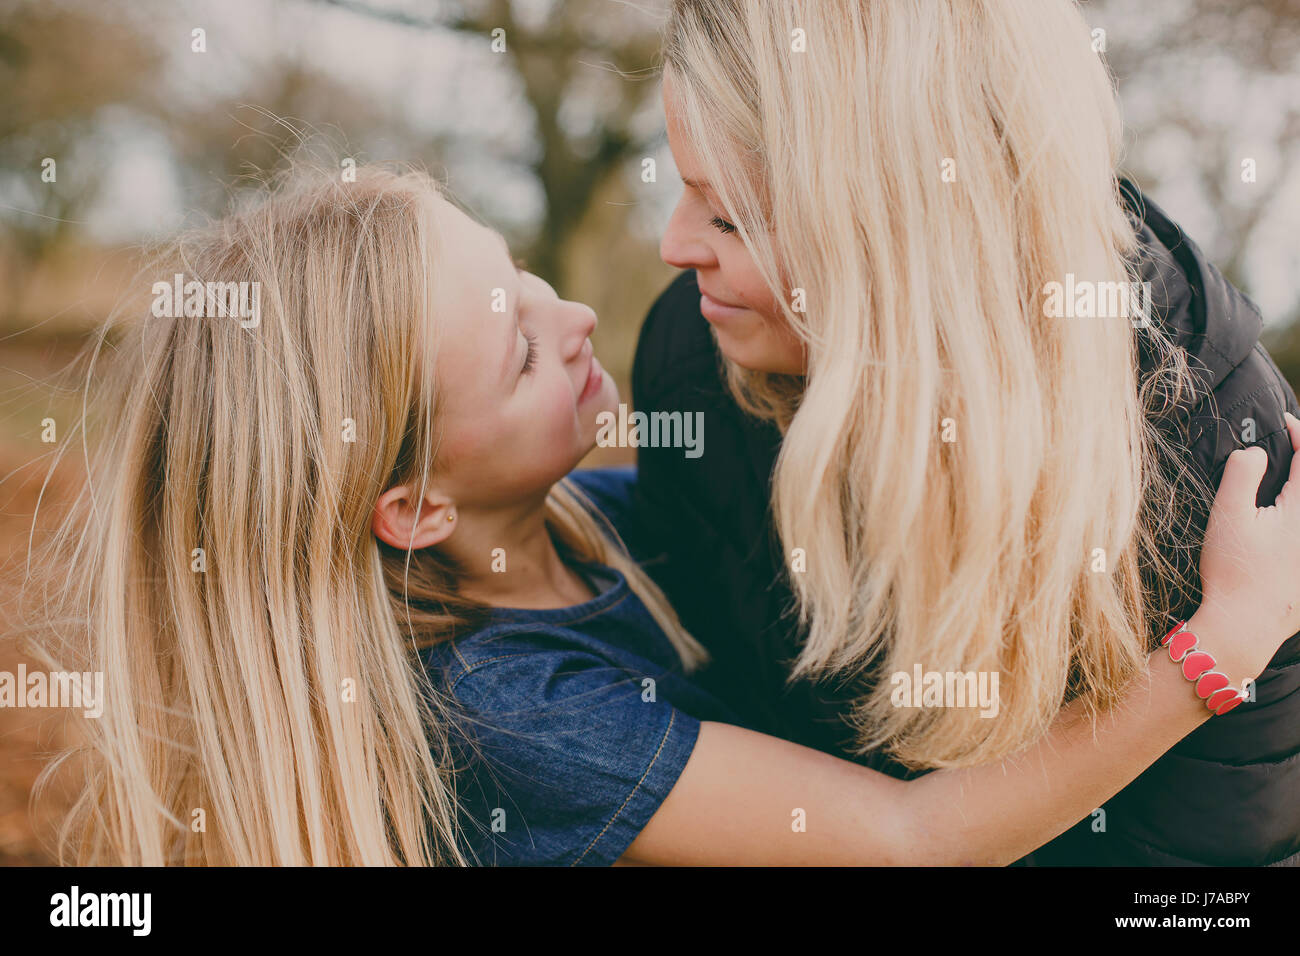 Mother and daughter smiling at each other Stock Photo